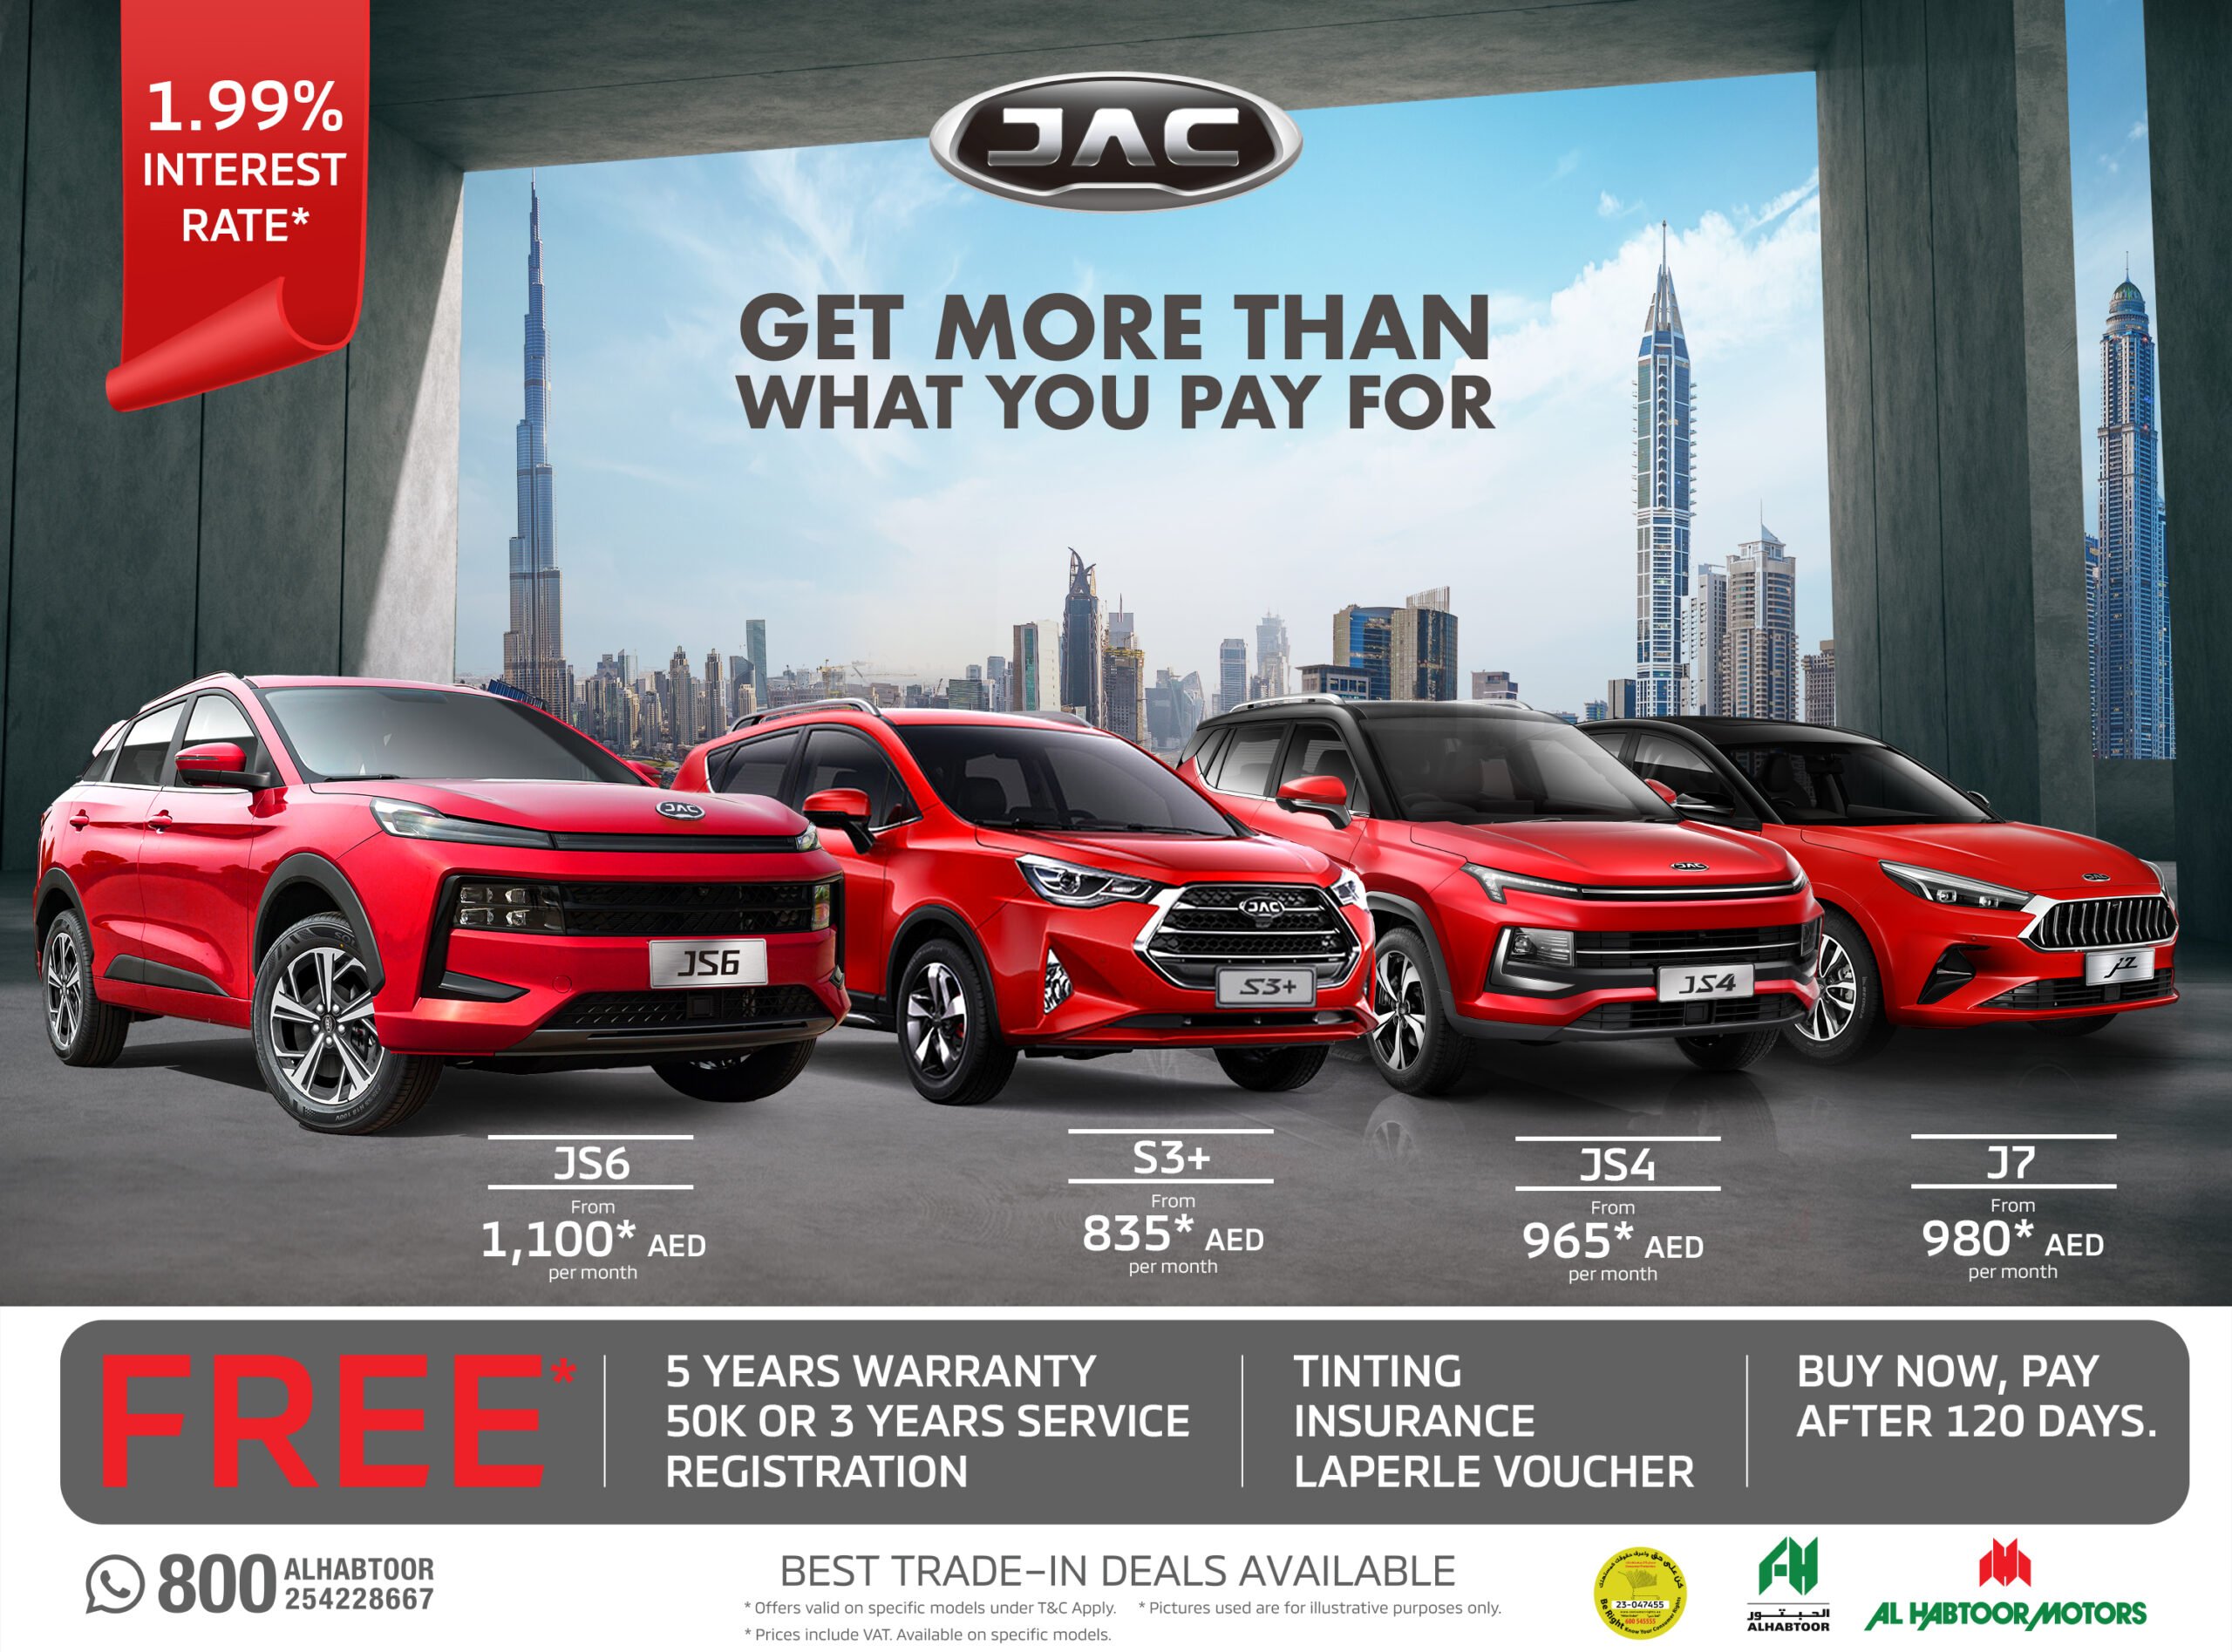 JAC Motors Dubai Shopping Festival Special: Exclusive Offers, Free Servicing and Flexible Payment Options